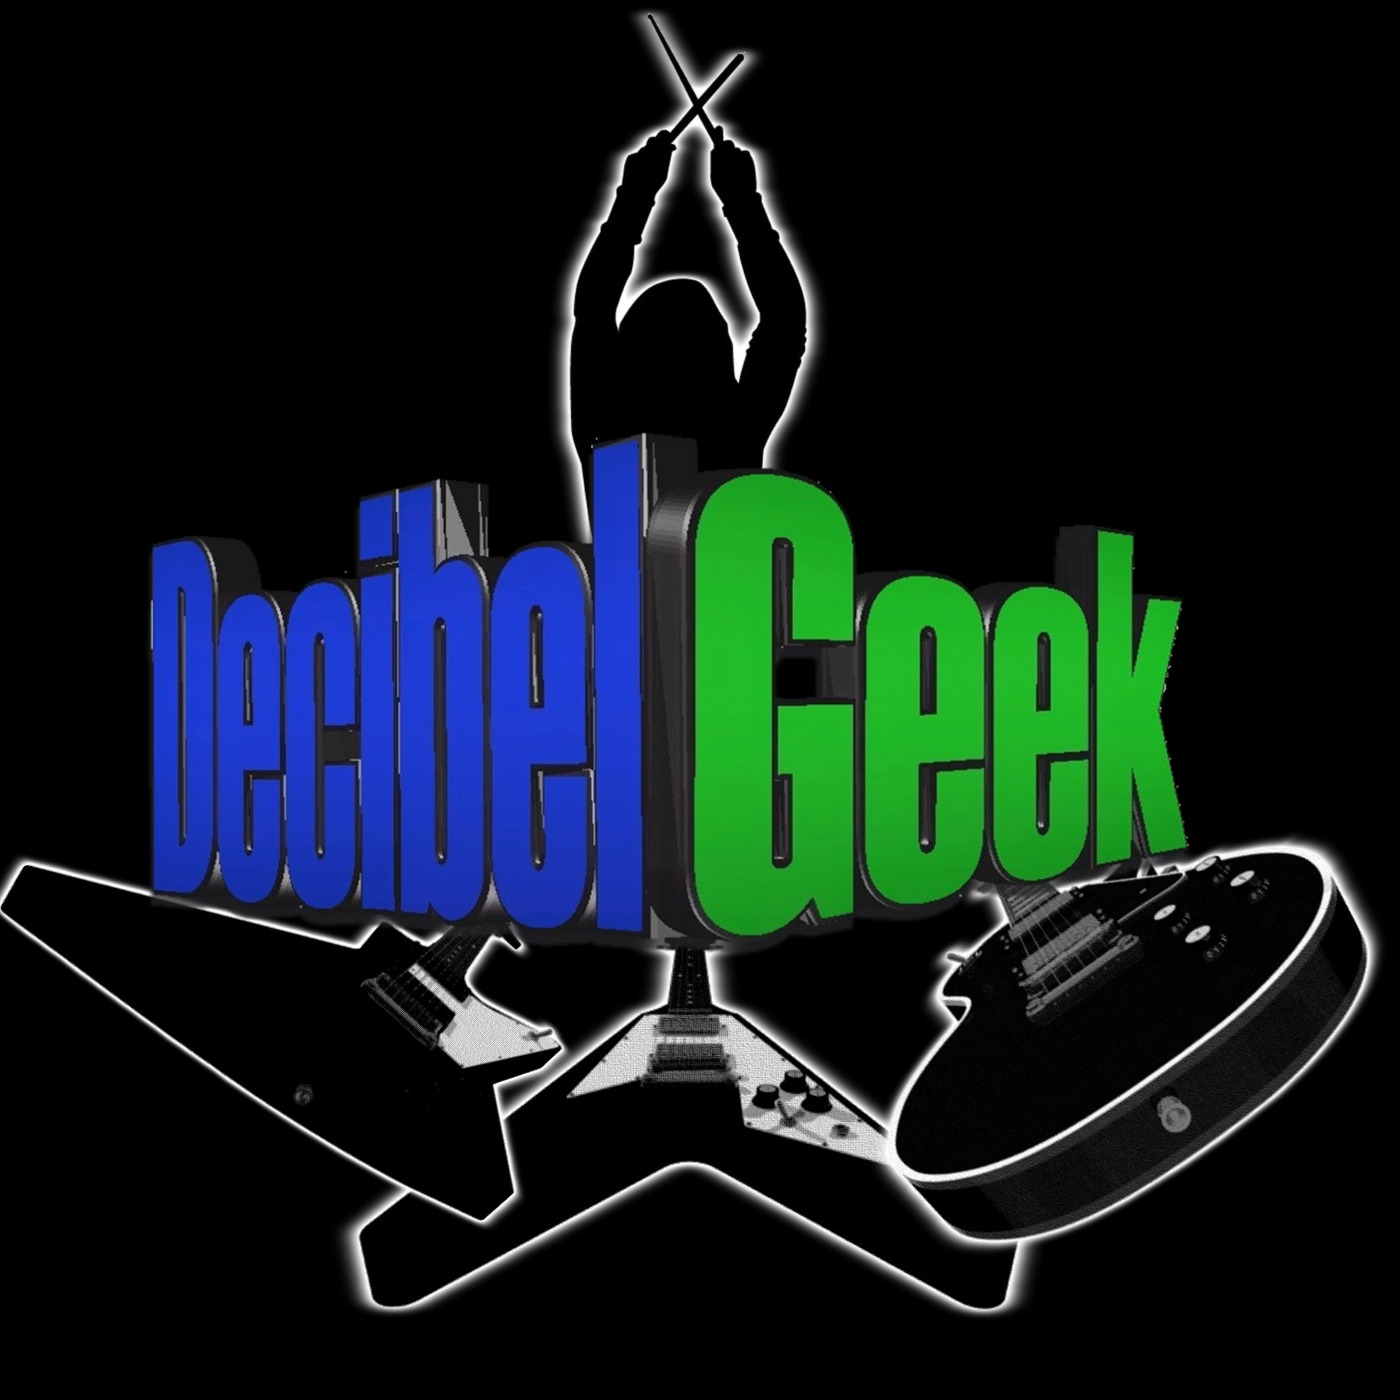 Episode 64 - Songs for the Apocalypse Decibel Geek - Hard Rock and Heavy Metal Discussion1400 x 1400